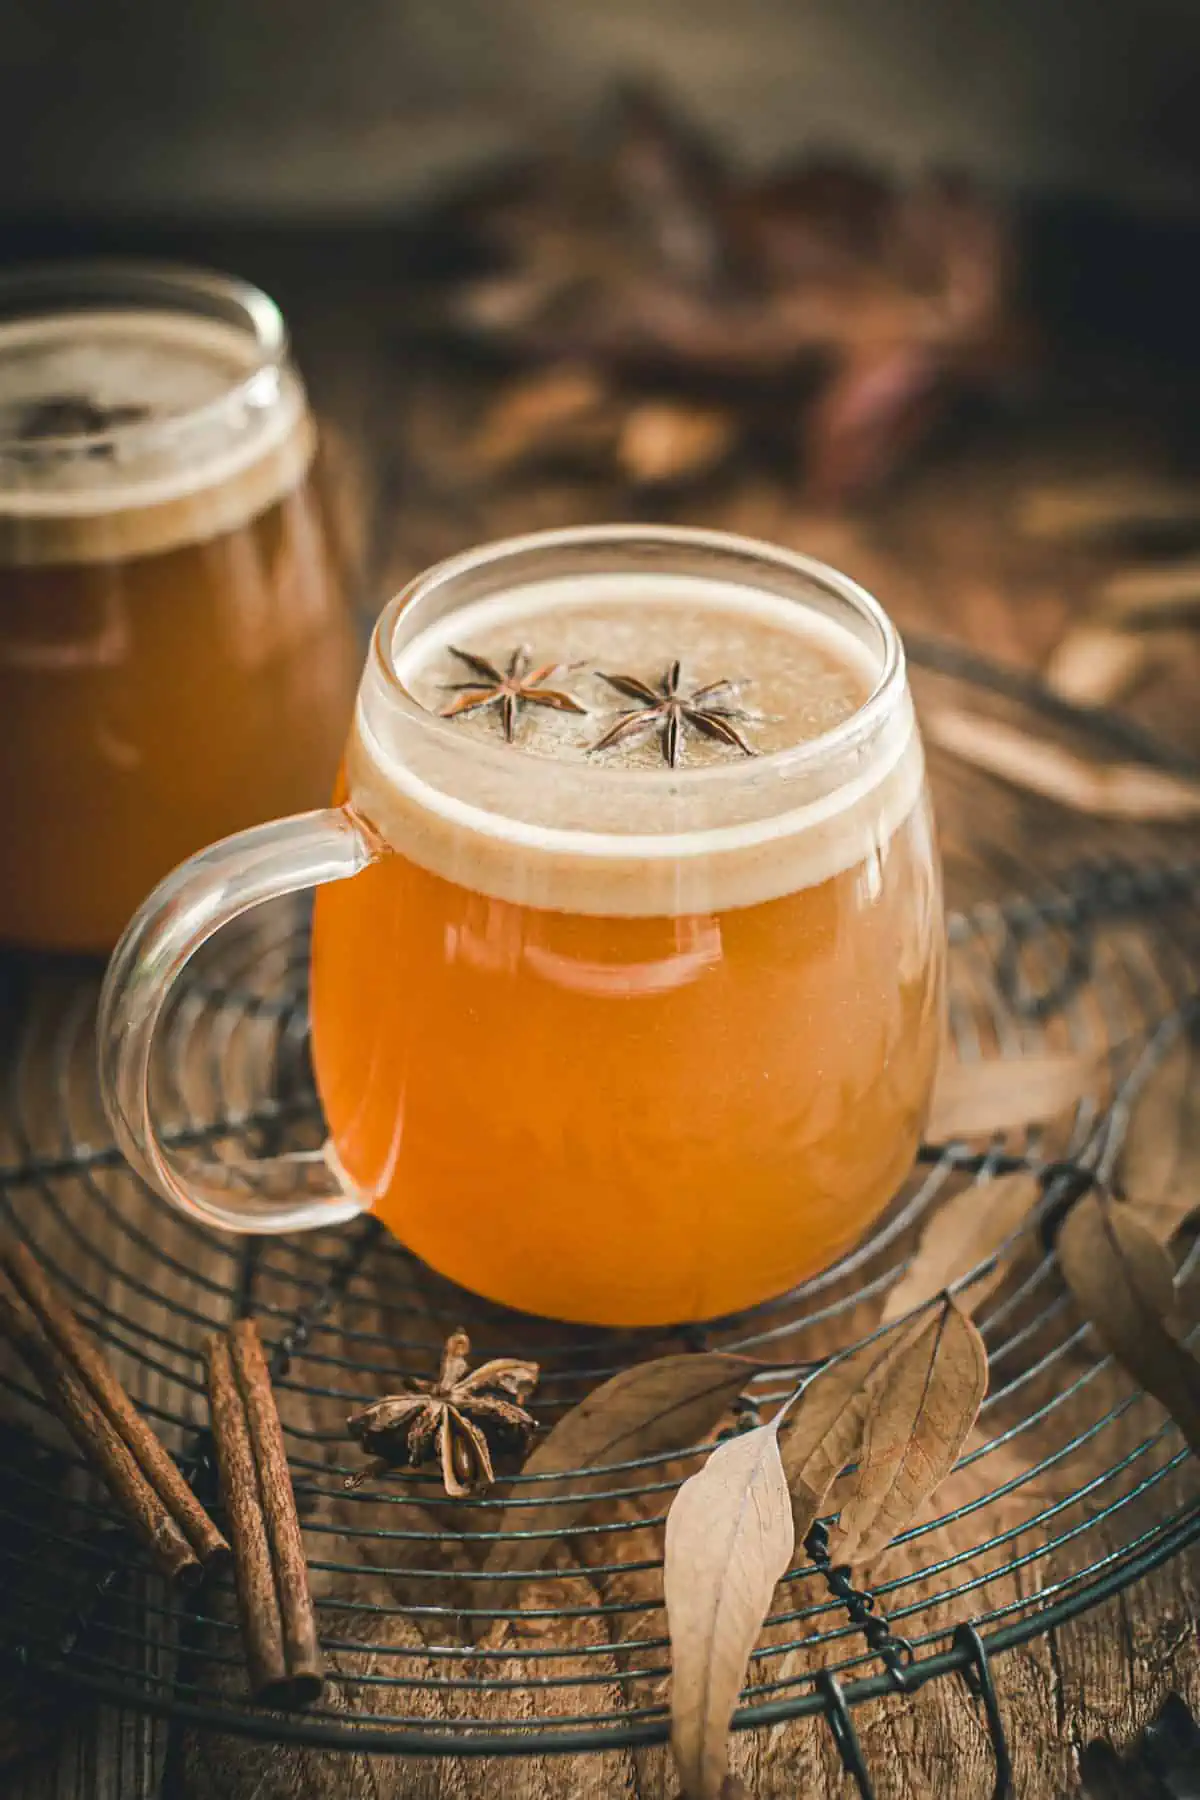 Hot Buttered Rum topped with star anise for garnish.